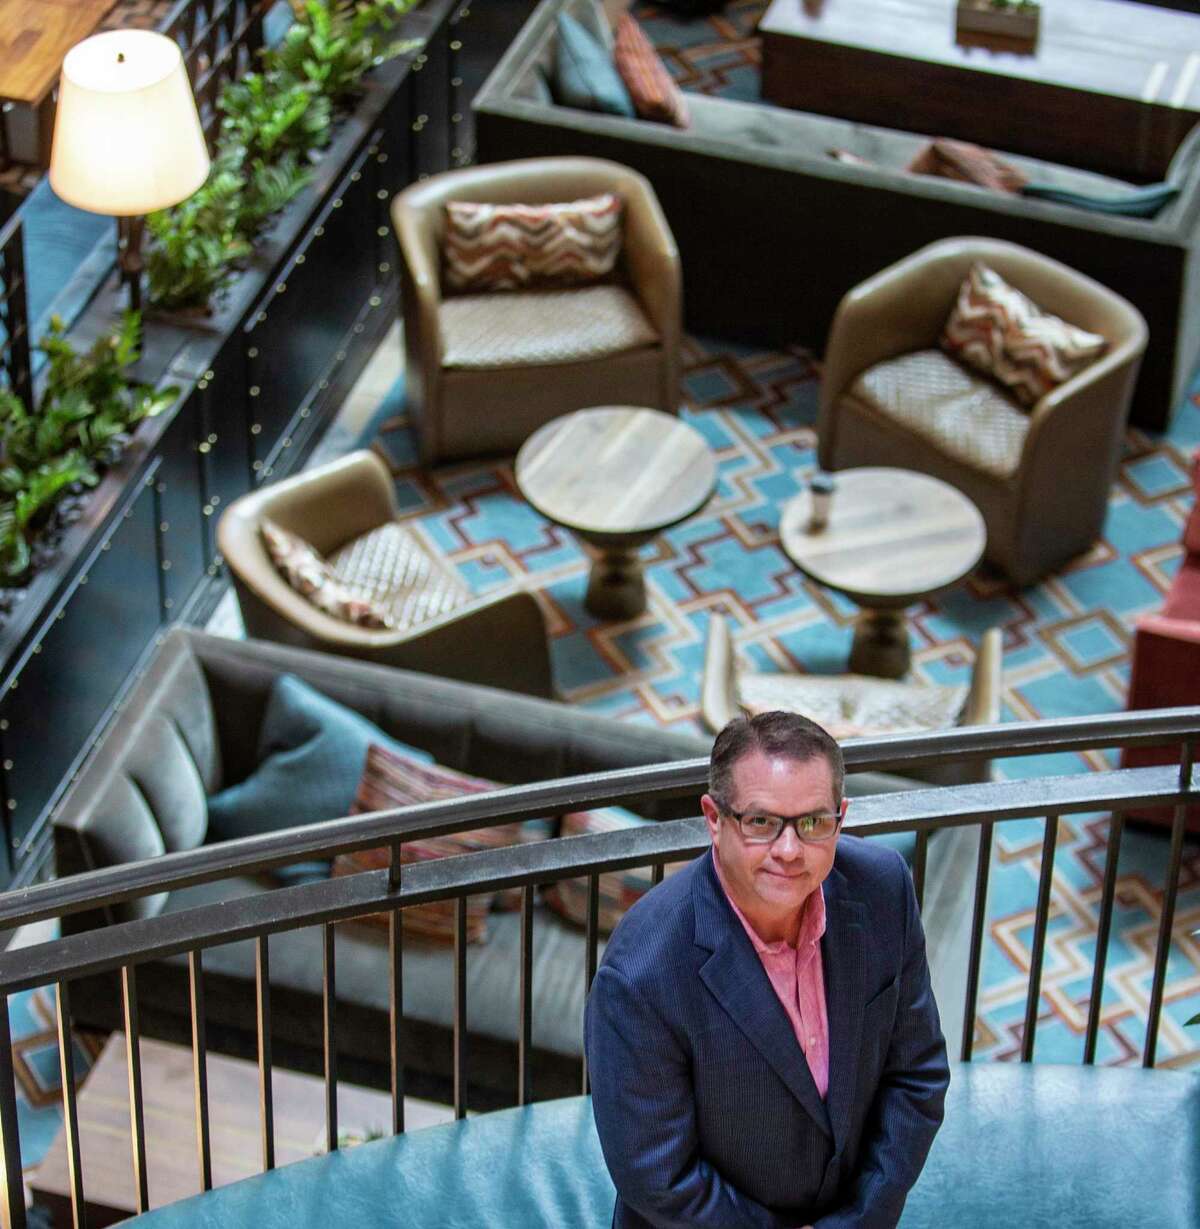 Dan Waters, general manager of Hotel Contessa, poses March 21, 2022, in the lobby of the downtown hotel.